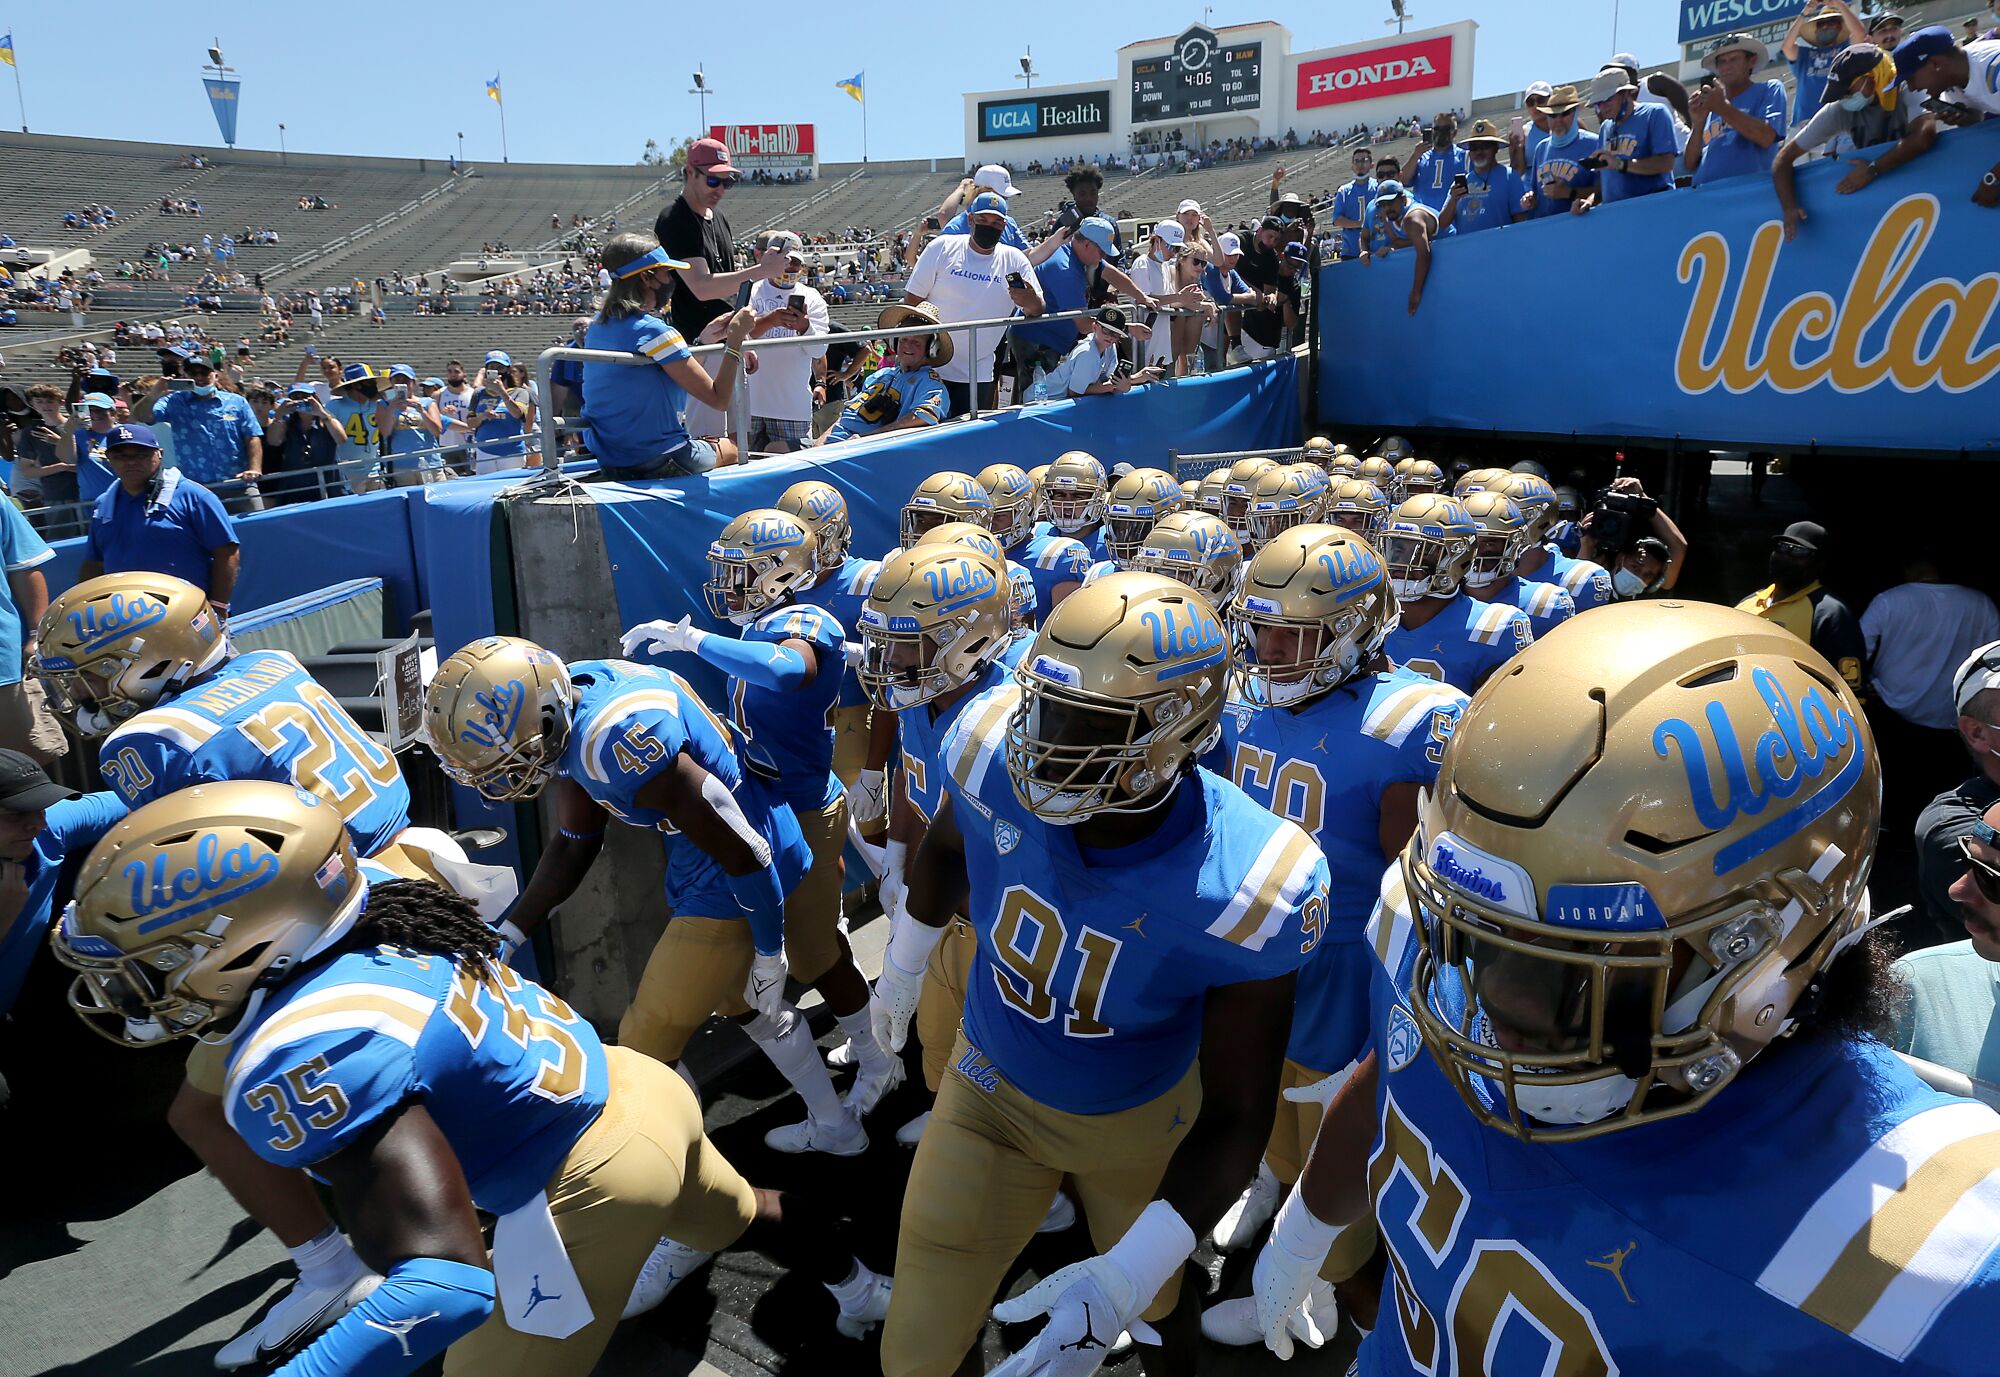 UCLA players take the field at the Rose Bowl for their season opener against Hawaii.